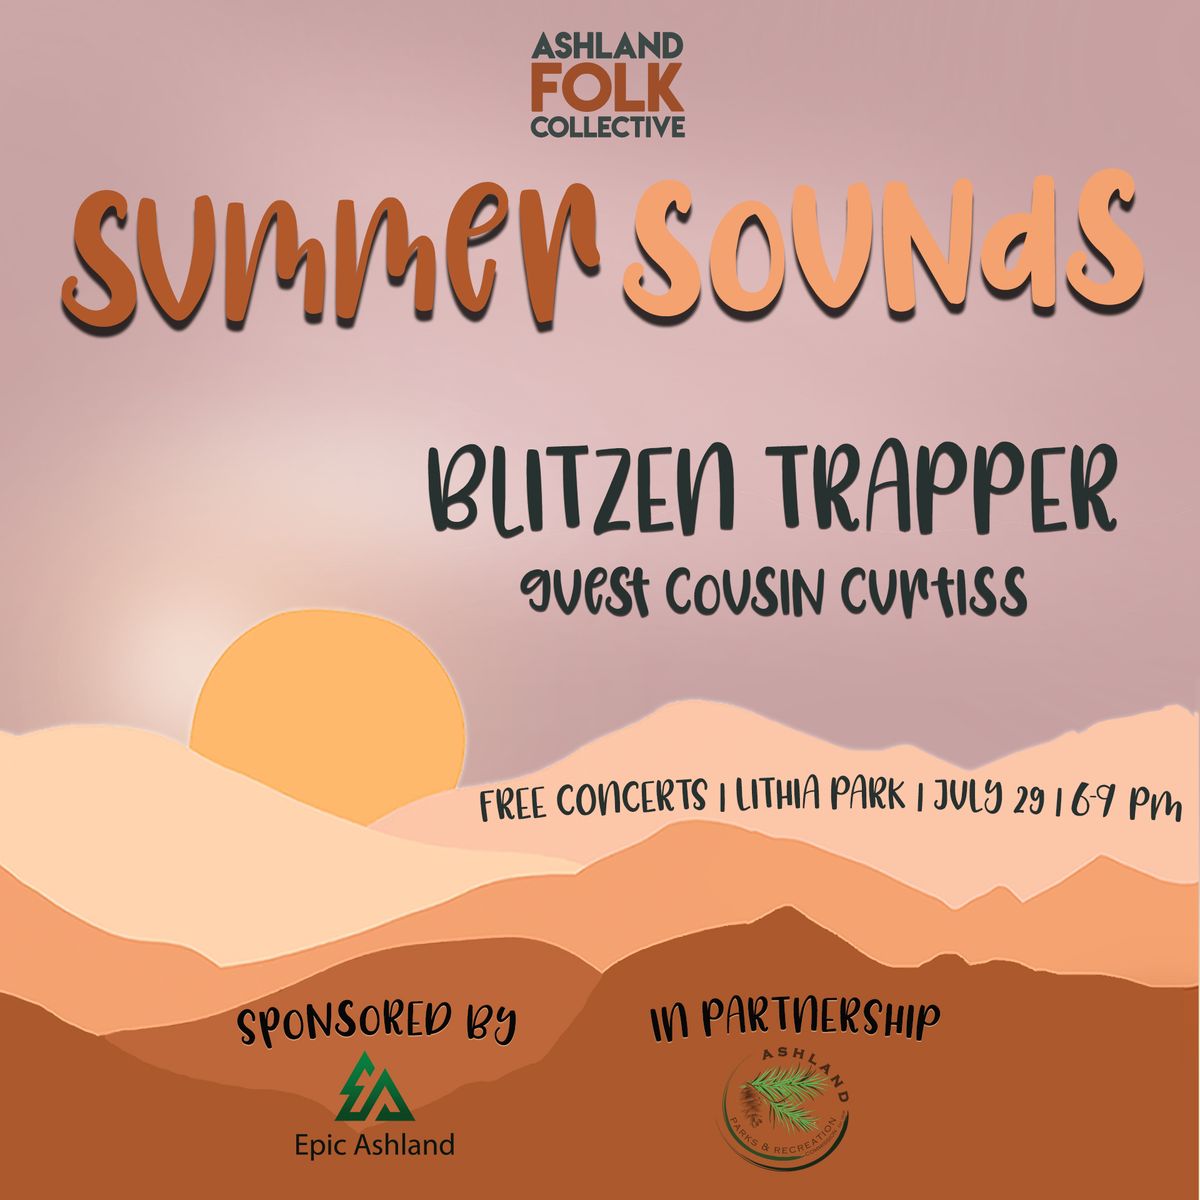 Blitzen Trapper with Cousin Curtiss presented by the Ashland Folk Collective 